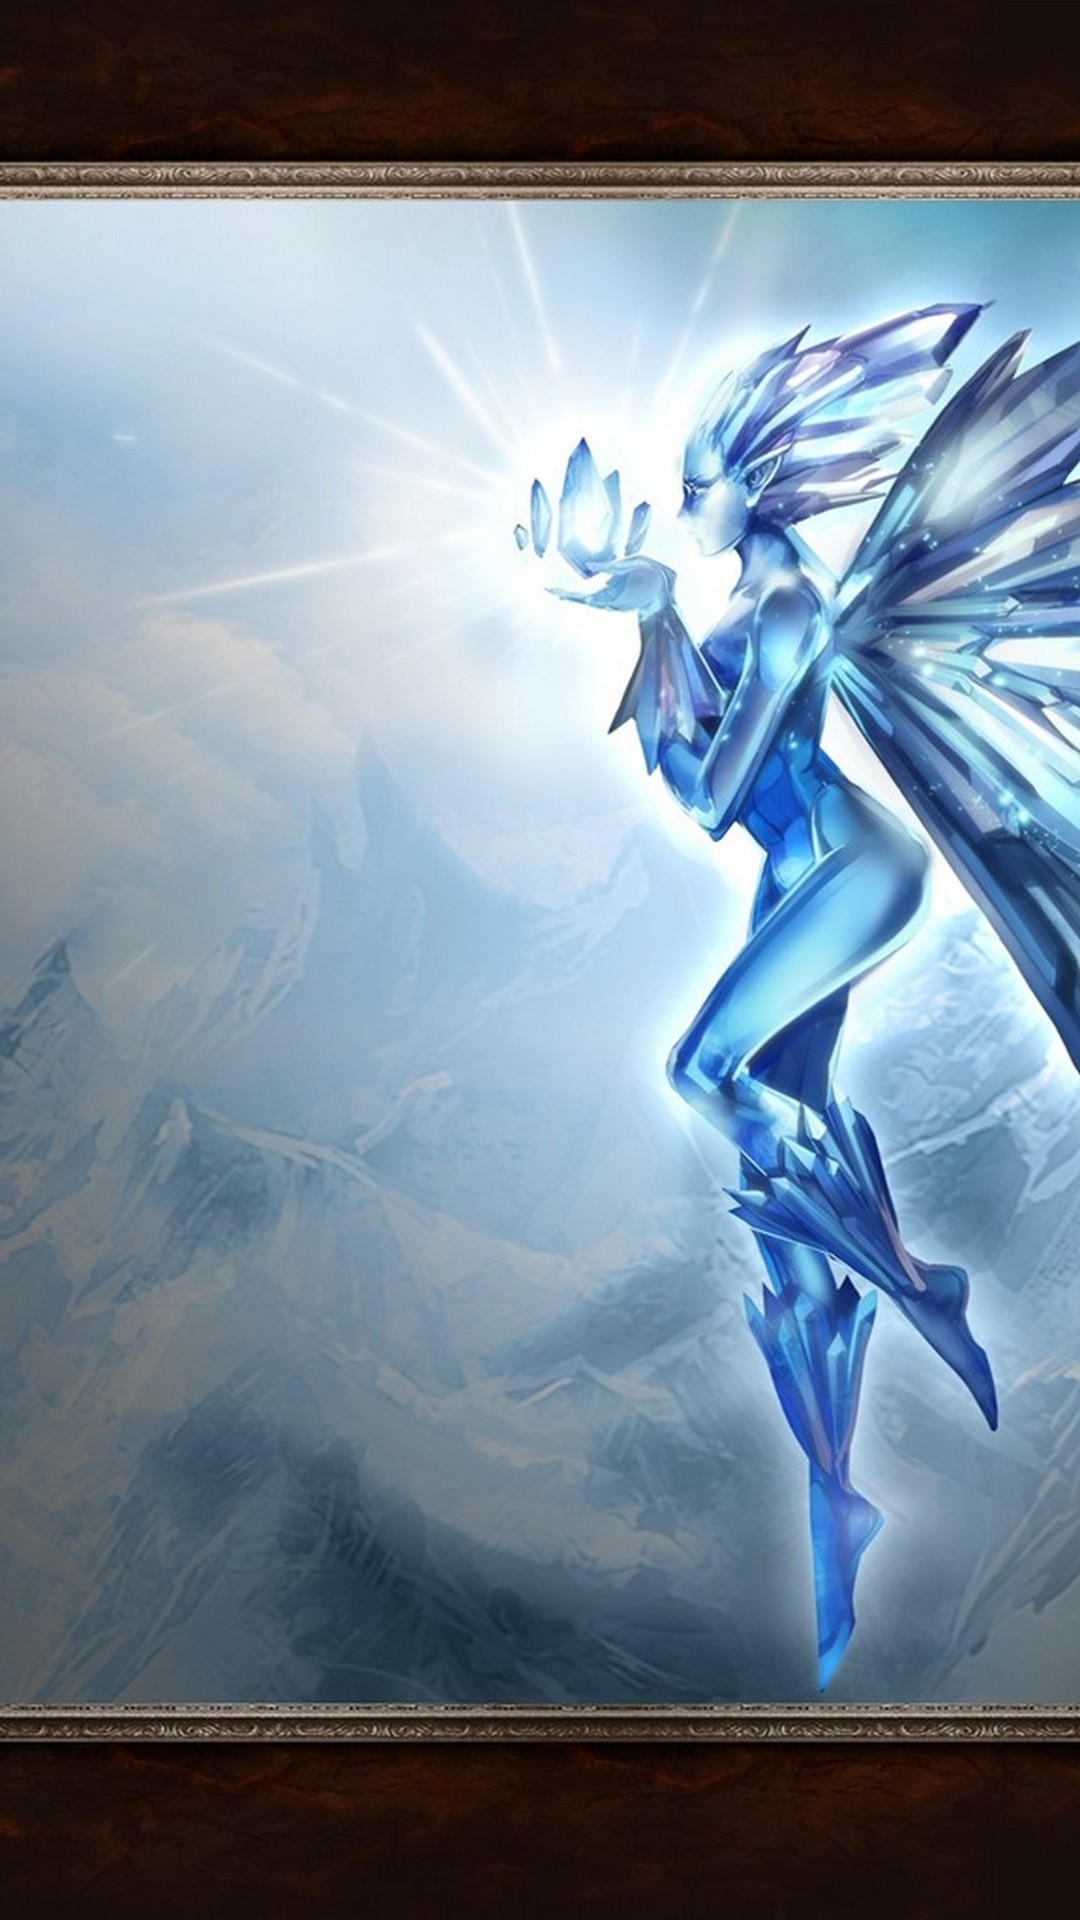 iPhone Wallpaper Ice Phoenix with image resolution 1080x1920 pixel. You can make this wallpaper for your iPhone 5, 6, 7, 8, X backgrounds, Mobile Screensaver, or iPad Lock Screen